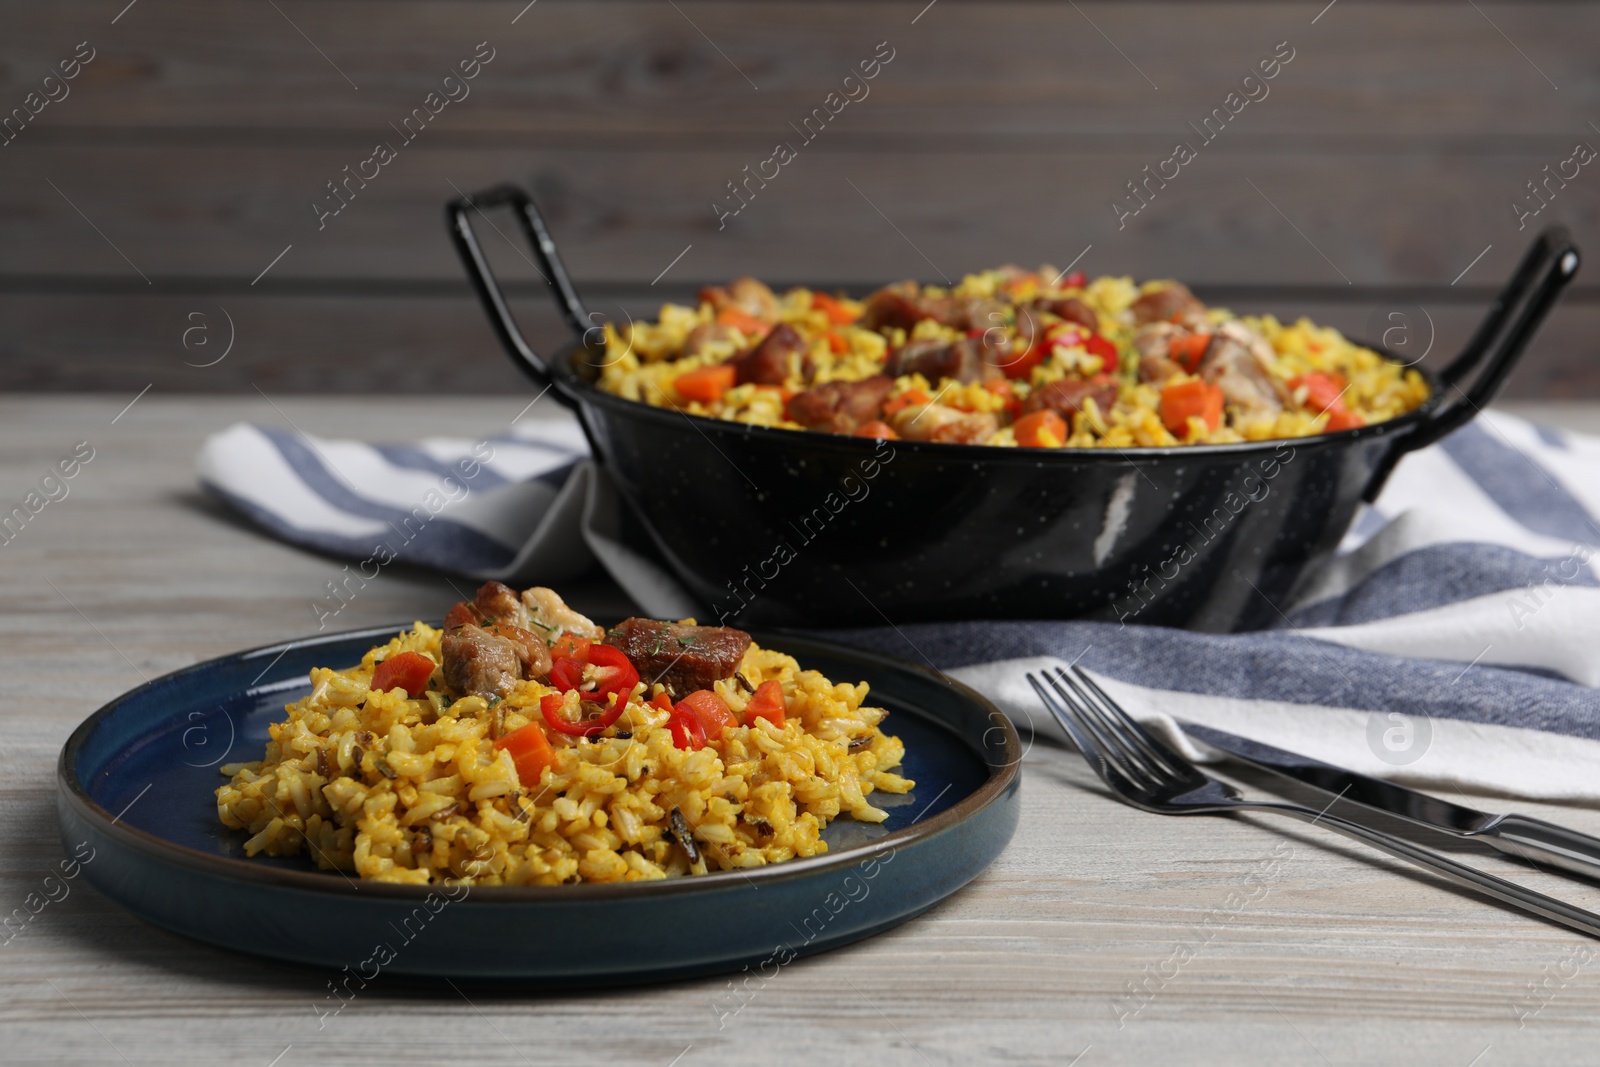 Photo of Delicious pilaf with meat, carrot and chili pepper on wooden table